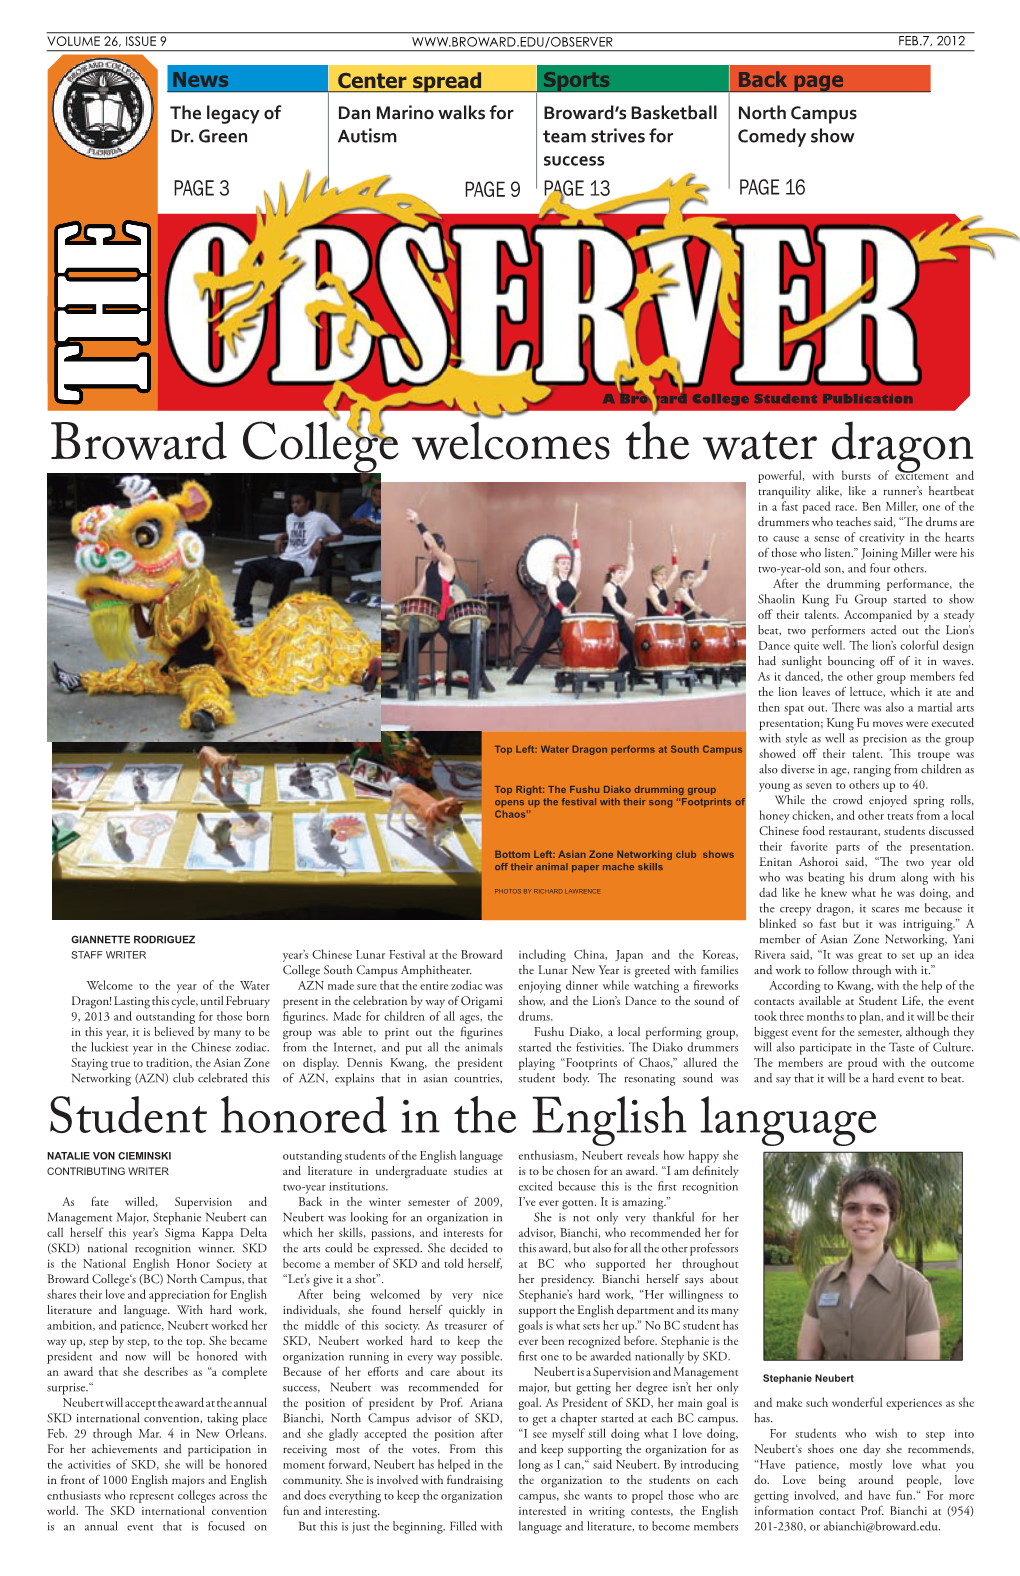 Broward College Welcomes the Water Dragon